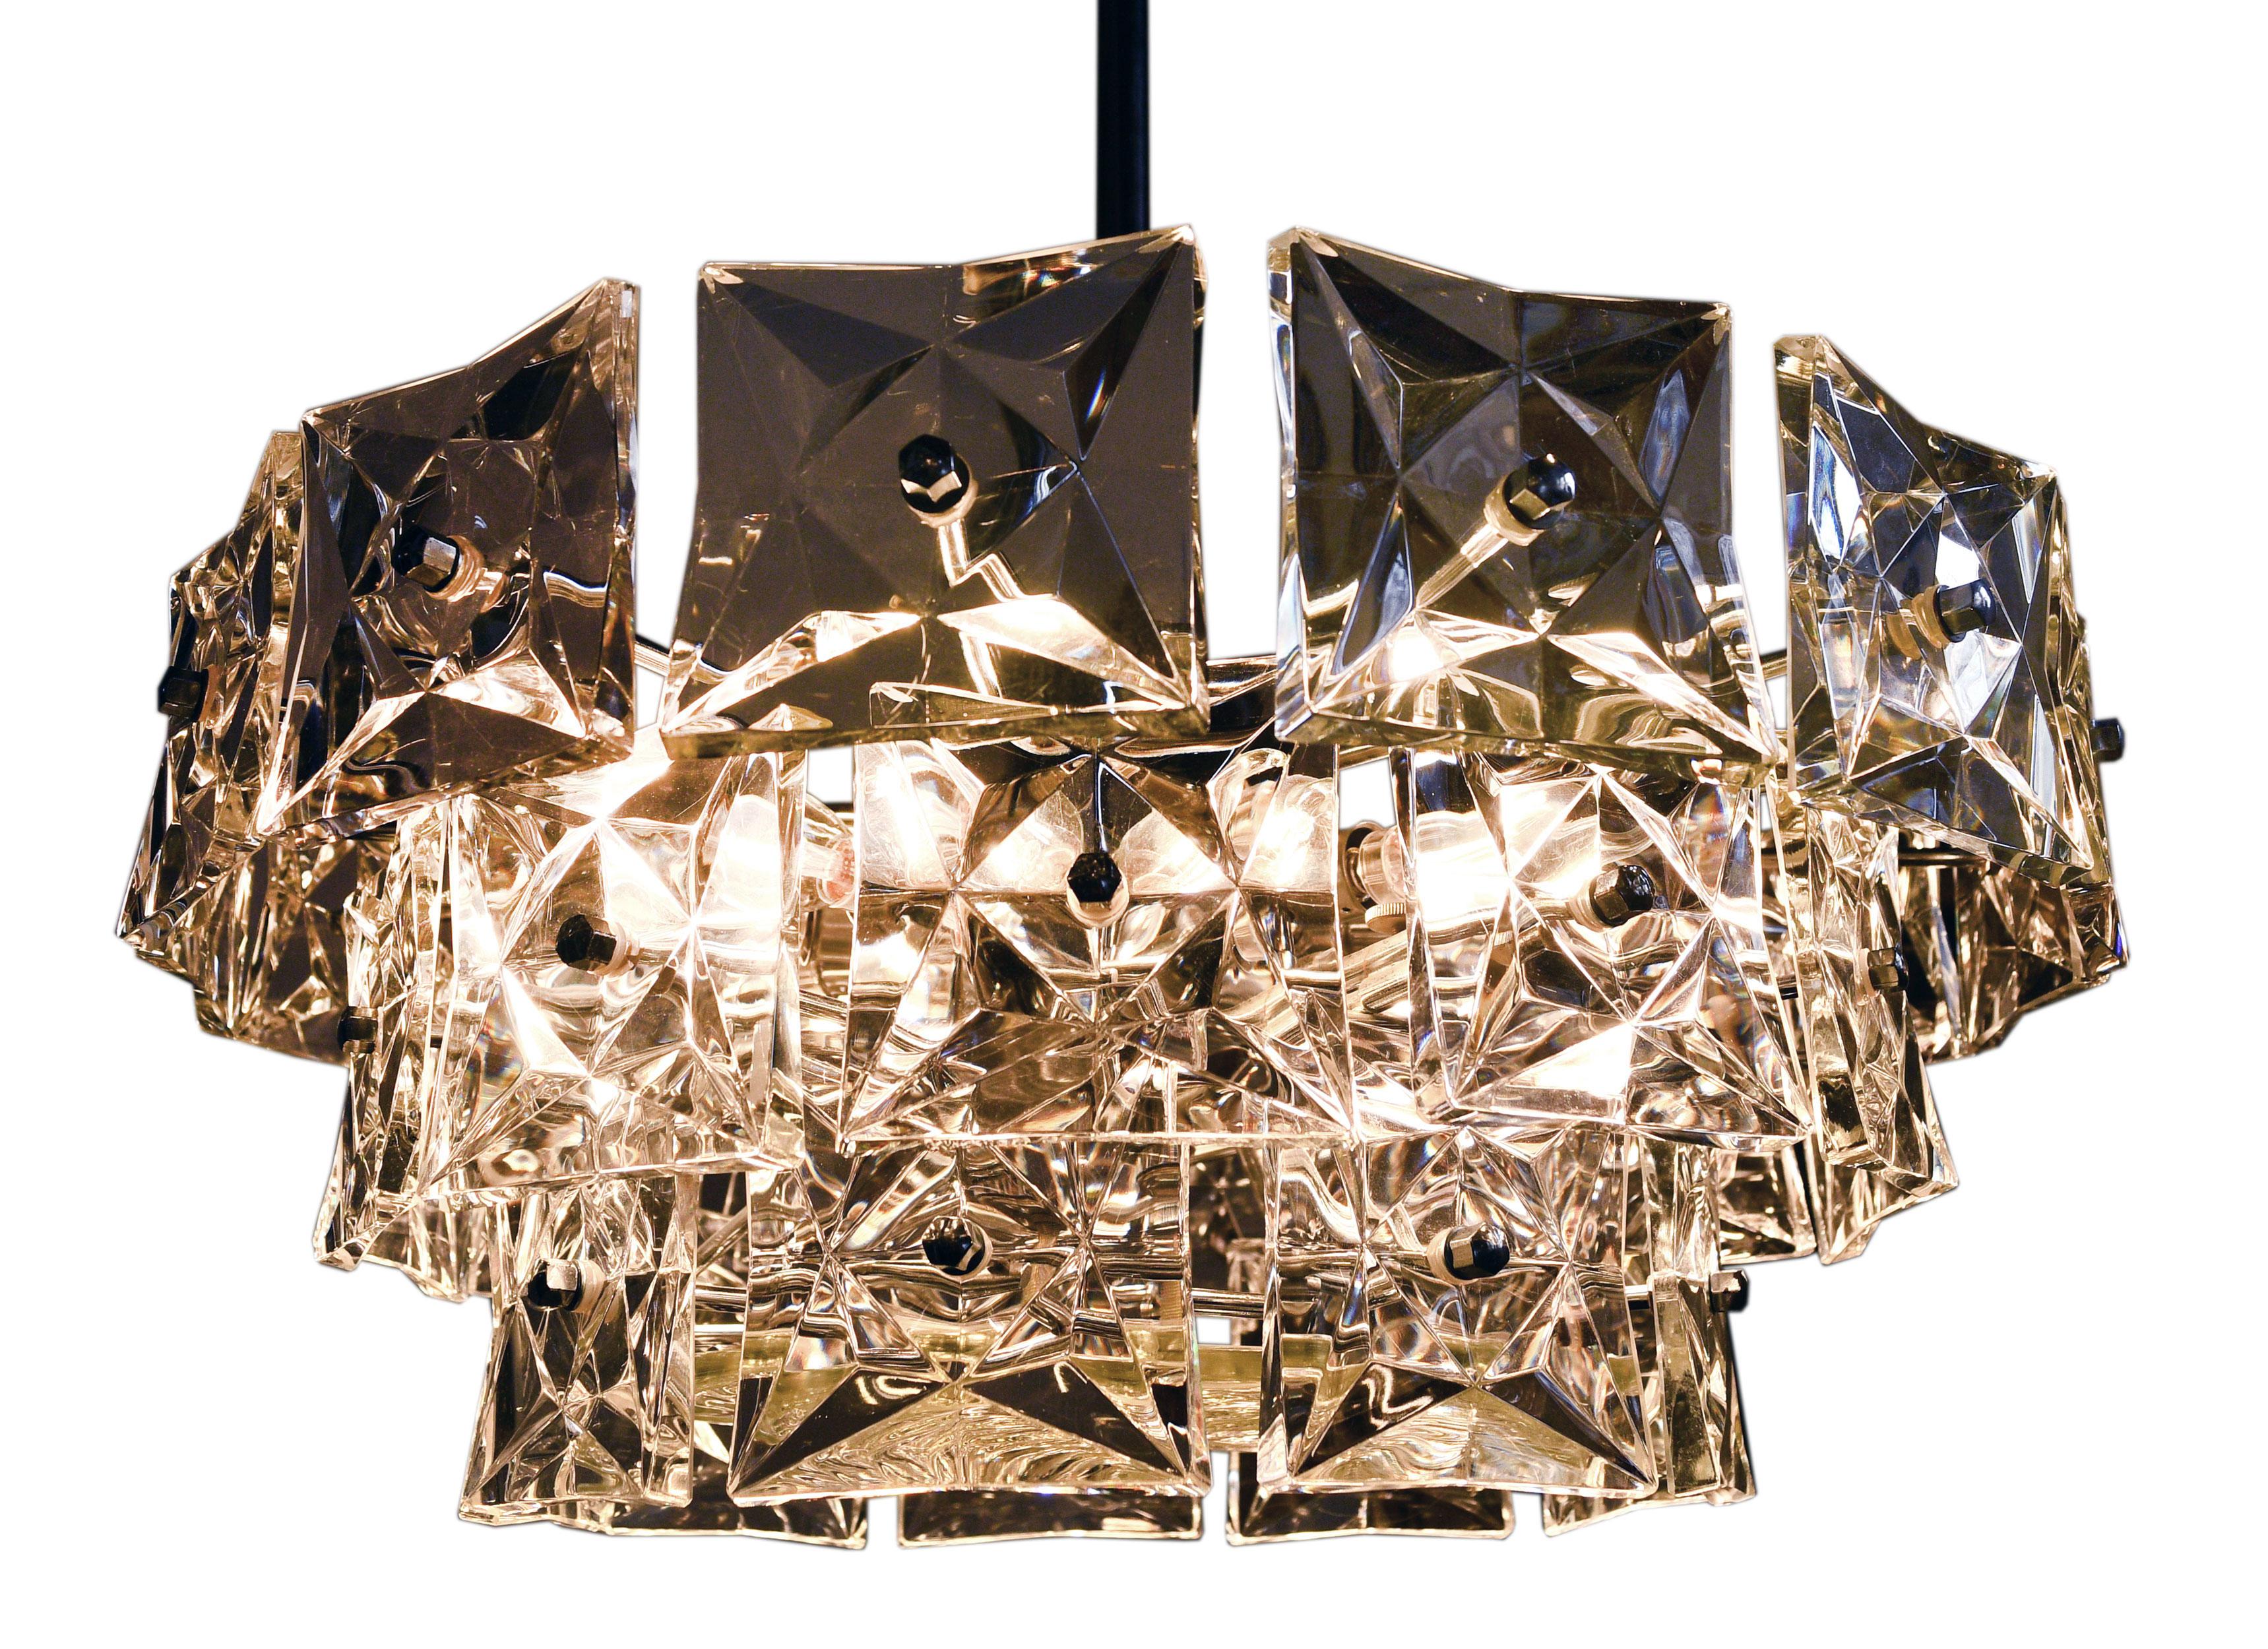 This stunningly crafted Kinkeldey chandelier features 3 levels of lovely hanging crystals and gives off warm glow when illuminated. Kinkeldey manufactured high end lighting fixtures in the 1960s and 1970s. The high-quality glass crystals can be